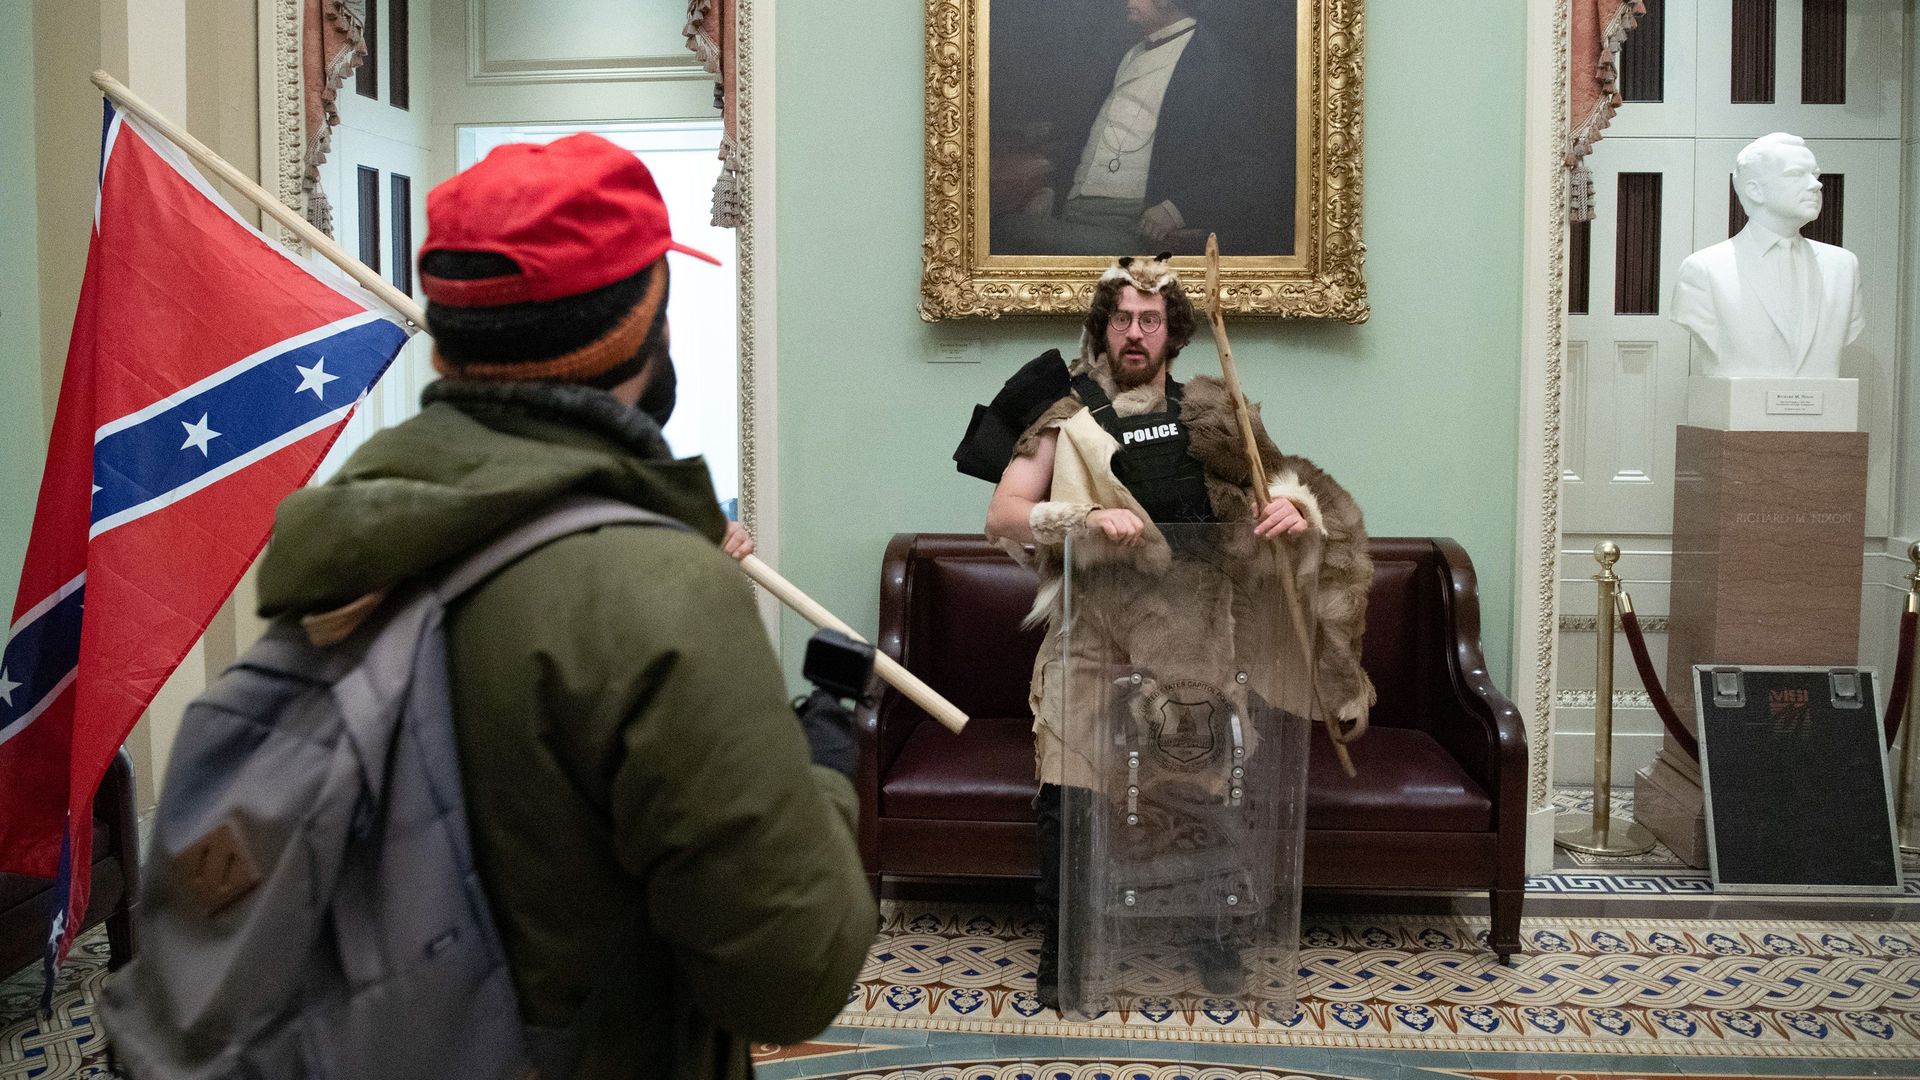 A man is seen carrying the Confederate flag outside the Senate Chamber after the Capitol was attacked Wednesday.